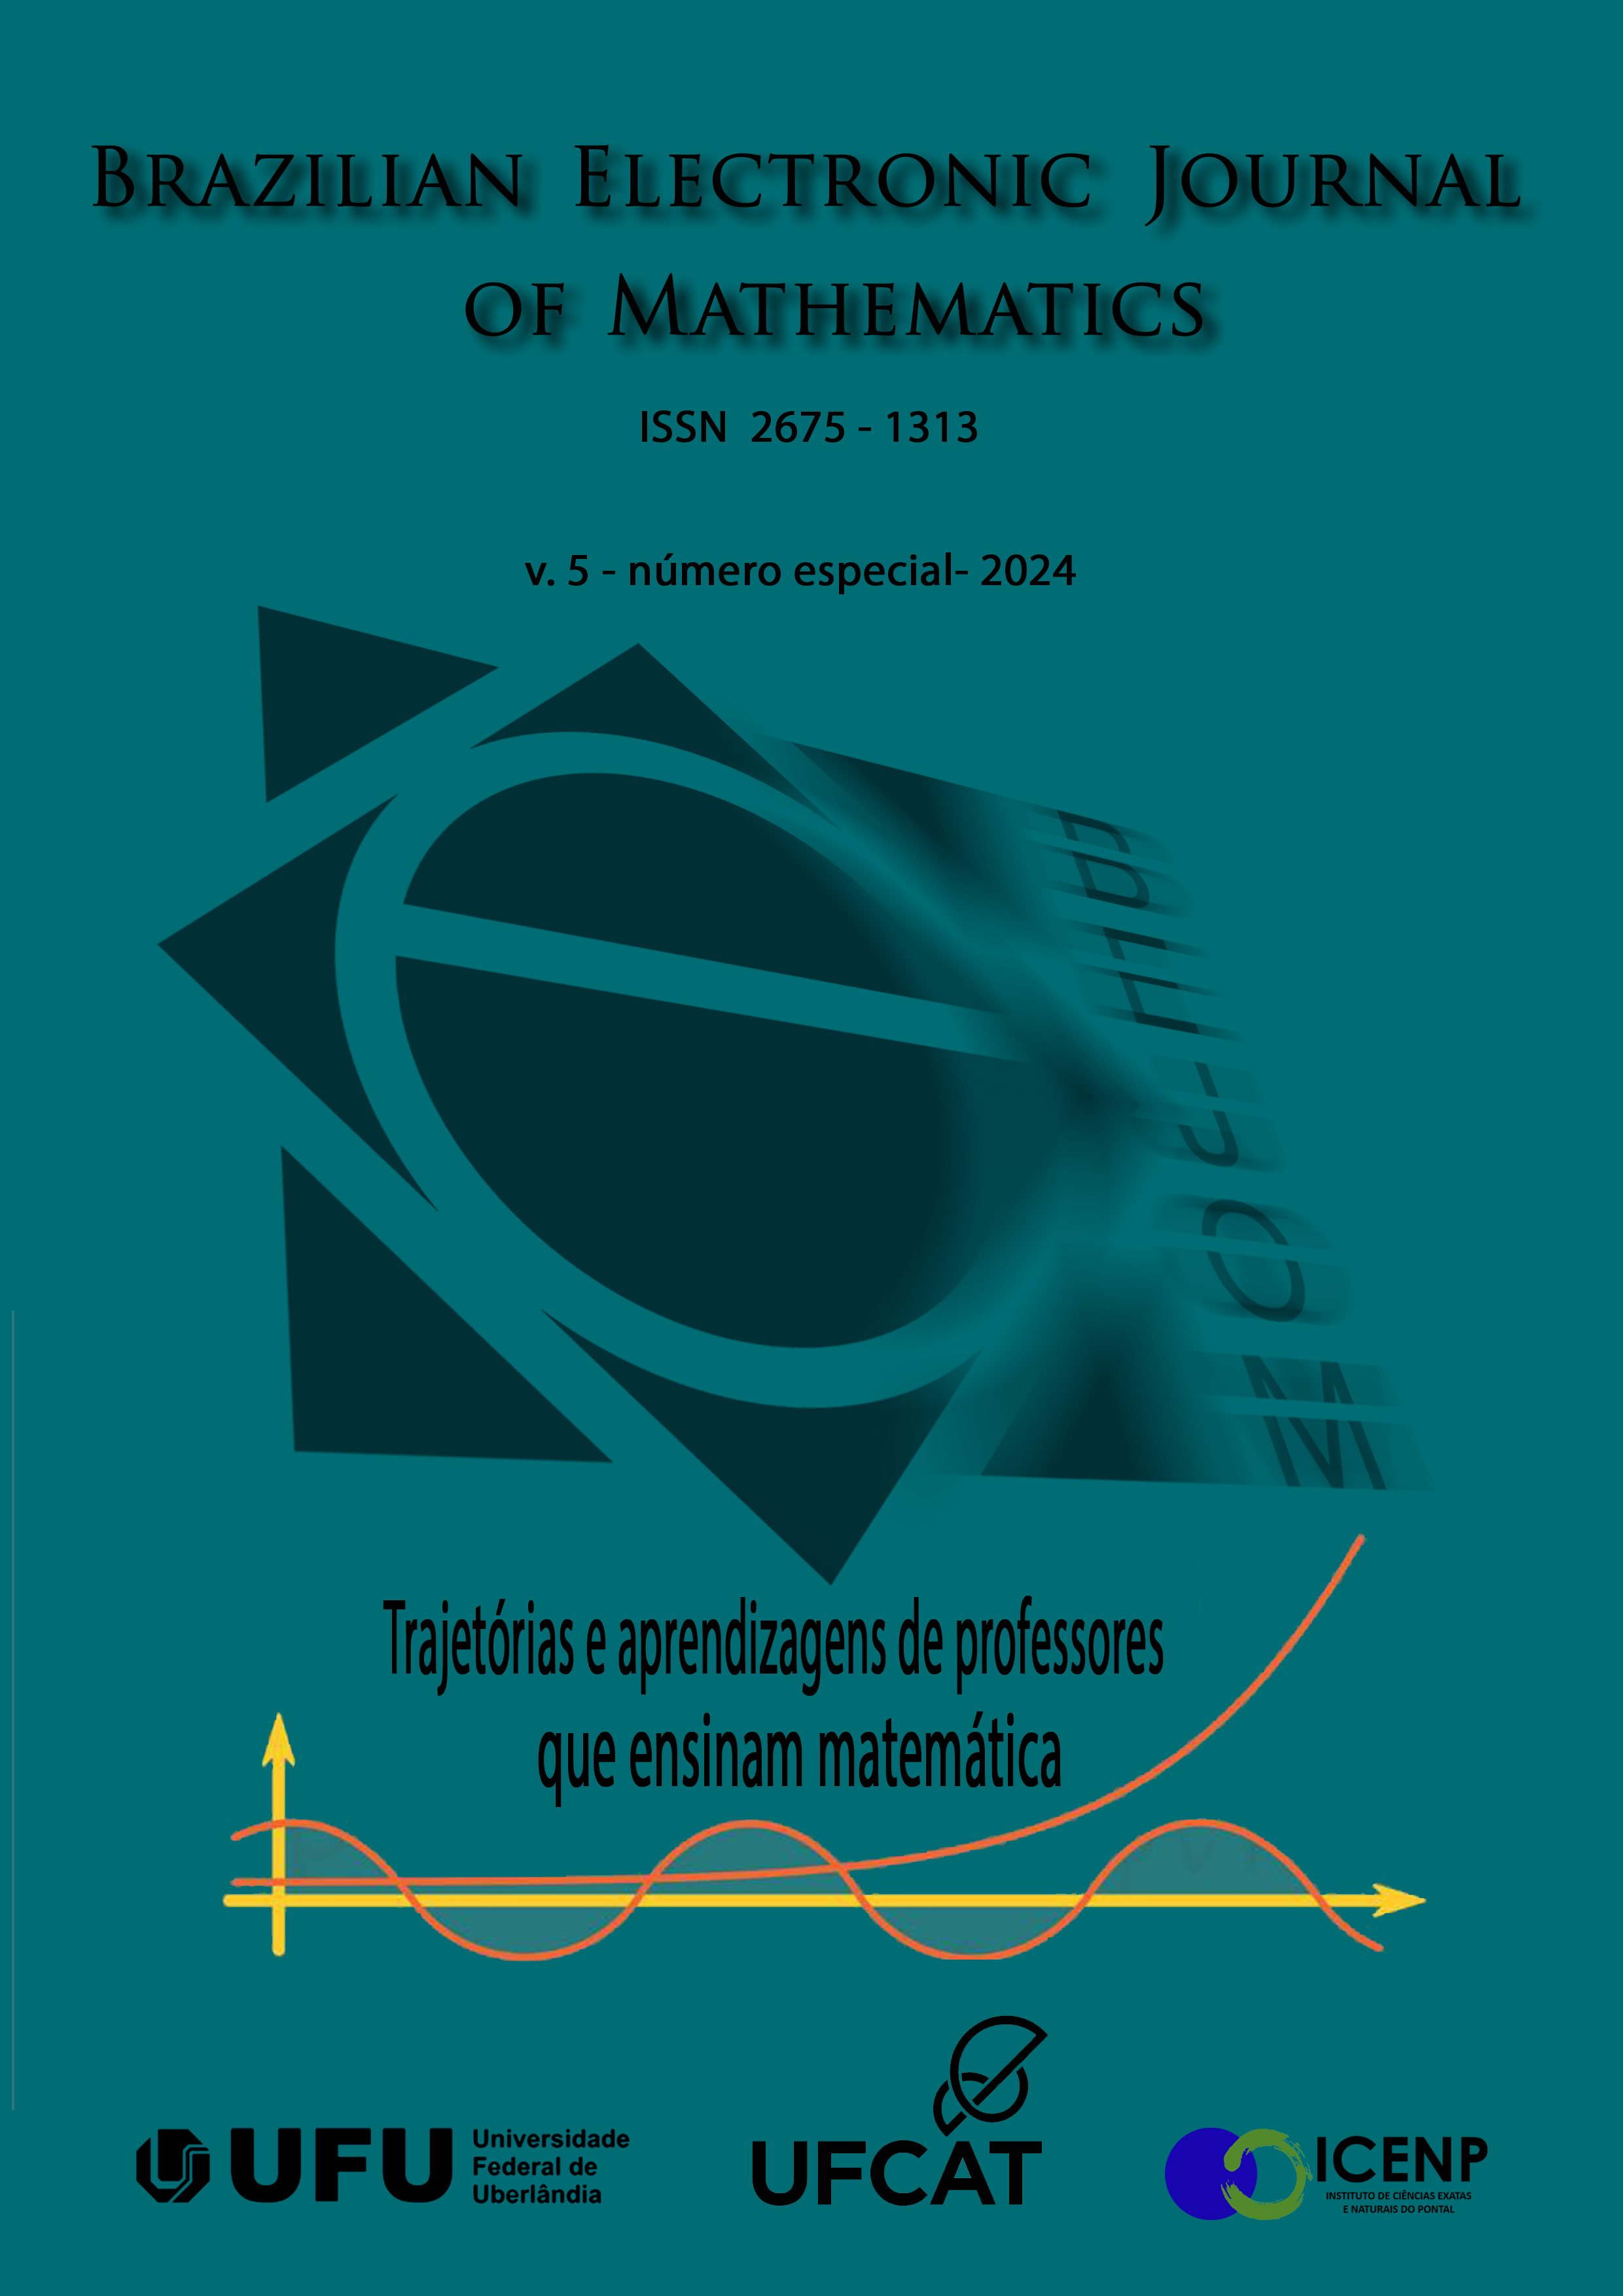 					View Vol. 5 No. especial - SiTAPEM (2024): Trajectories and Learning Experiences of Mathematics Teachers
				